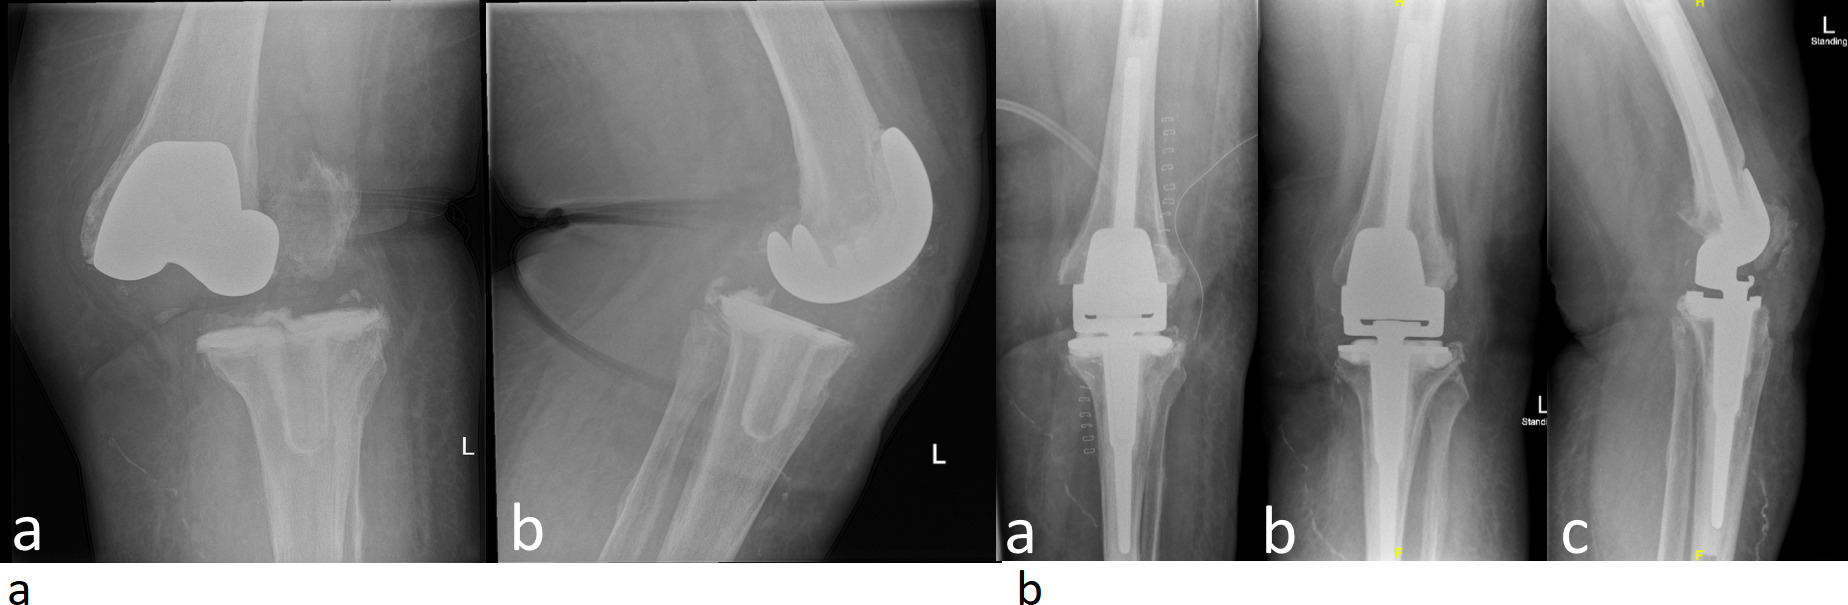 Fig. 3 
          a) Preoperative anteroposterior and lateral radiographs of a failed infected and dislocated total knee arthroplasty (TKA) in an 83-year-old female. b) Immediate postoperative, a) and two years follow-up; b-c) following revision TKA with a rotating hinge Stanmore Modular Individualized Lower Limb System (SMILES) prosthesis and satisfactory clinical and radiological outcomes.
        